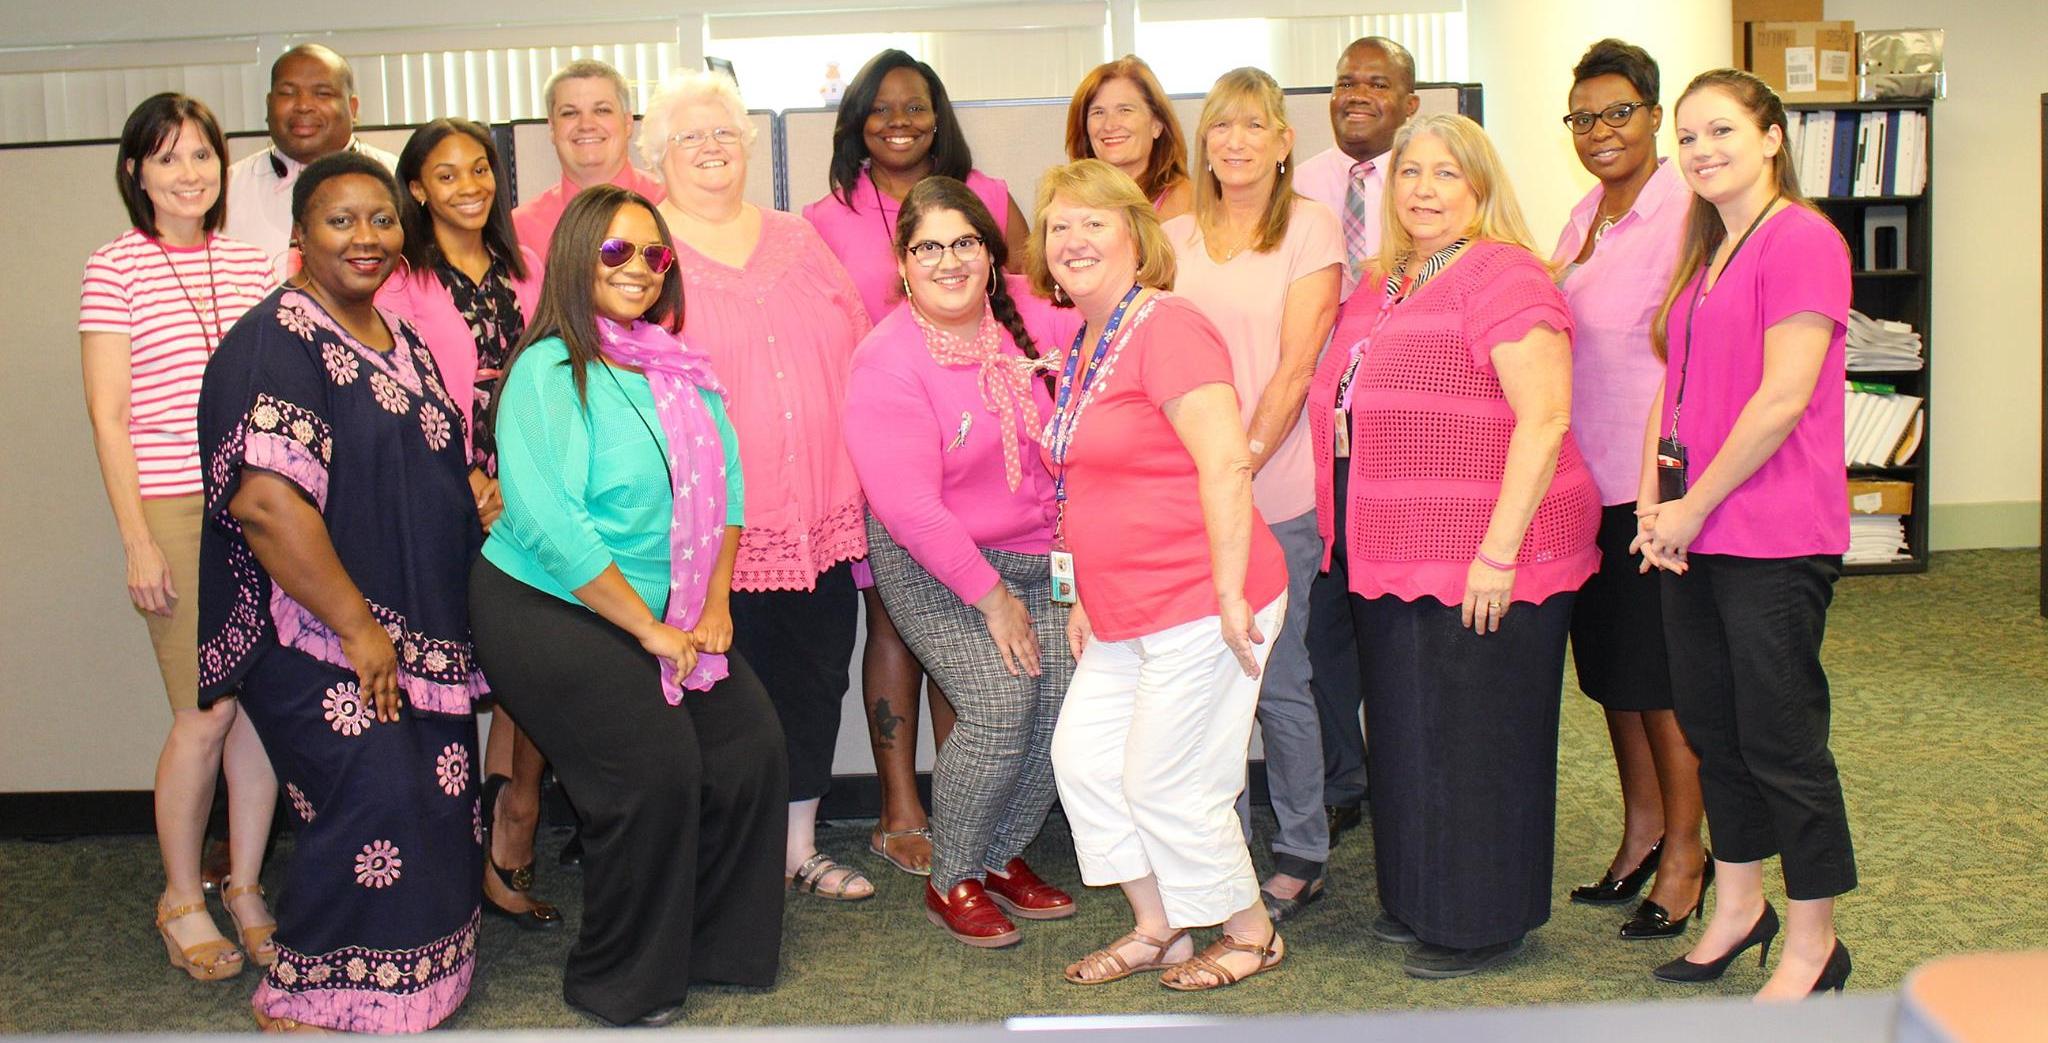 DBS employees wearing pink in support of breast cancer awareness month